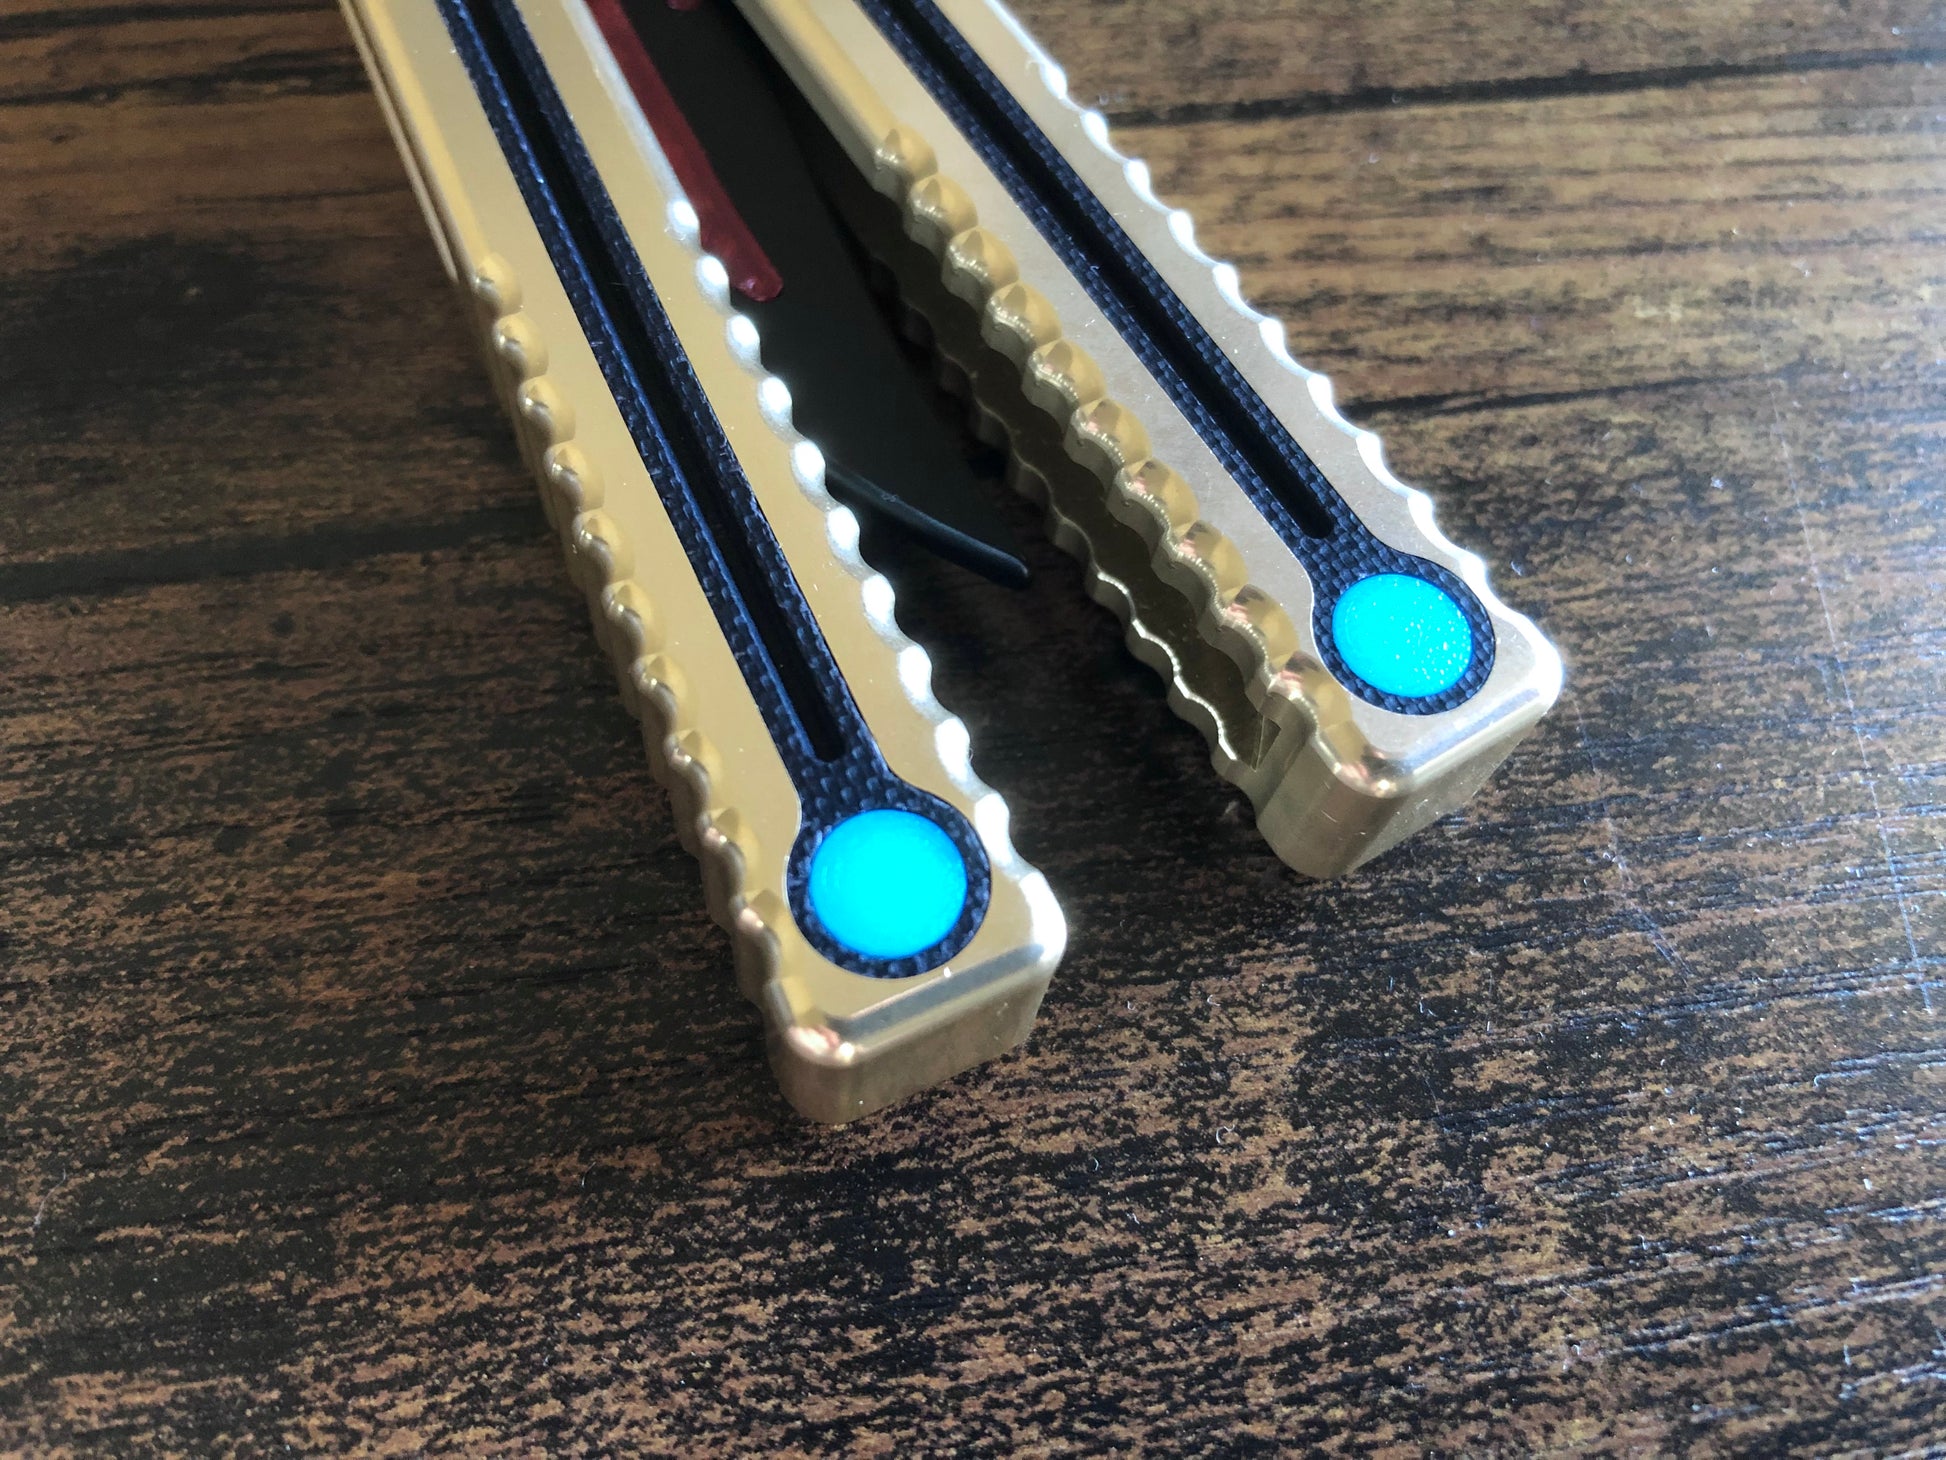 Pivot Plugs are a cosmetic handle inlay mod designed to friction fit in 3/16" bores at the bottom of a variety of balisong handles, including the Squid Industries Krake Raken balisong, the MachineWise Prysma, and the Nabalis Vulp Pro.